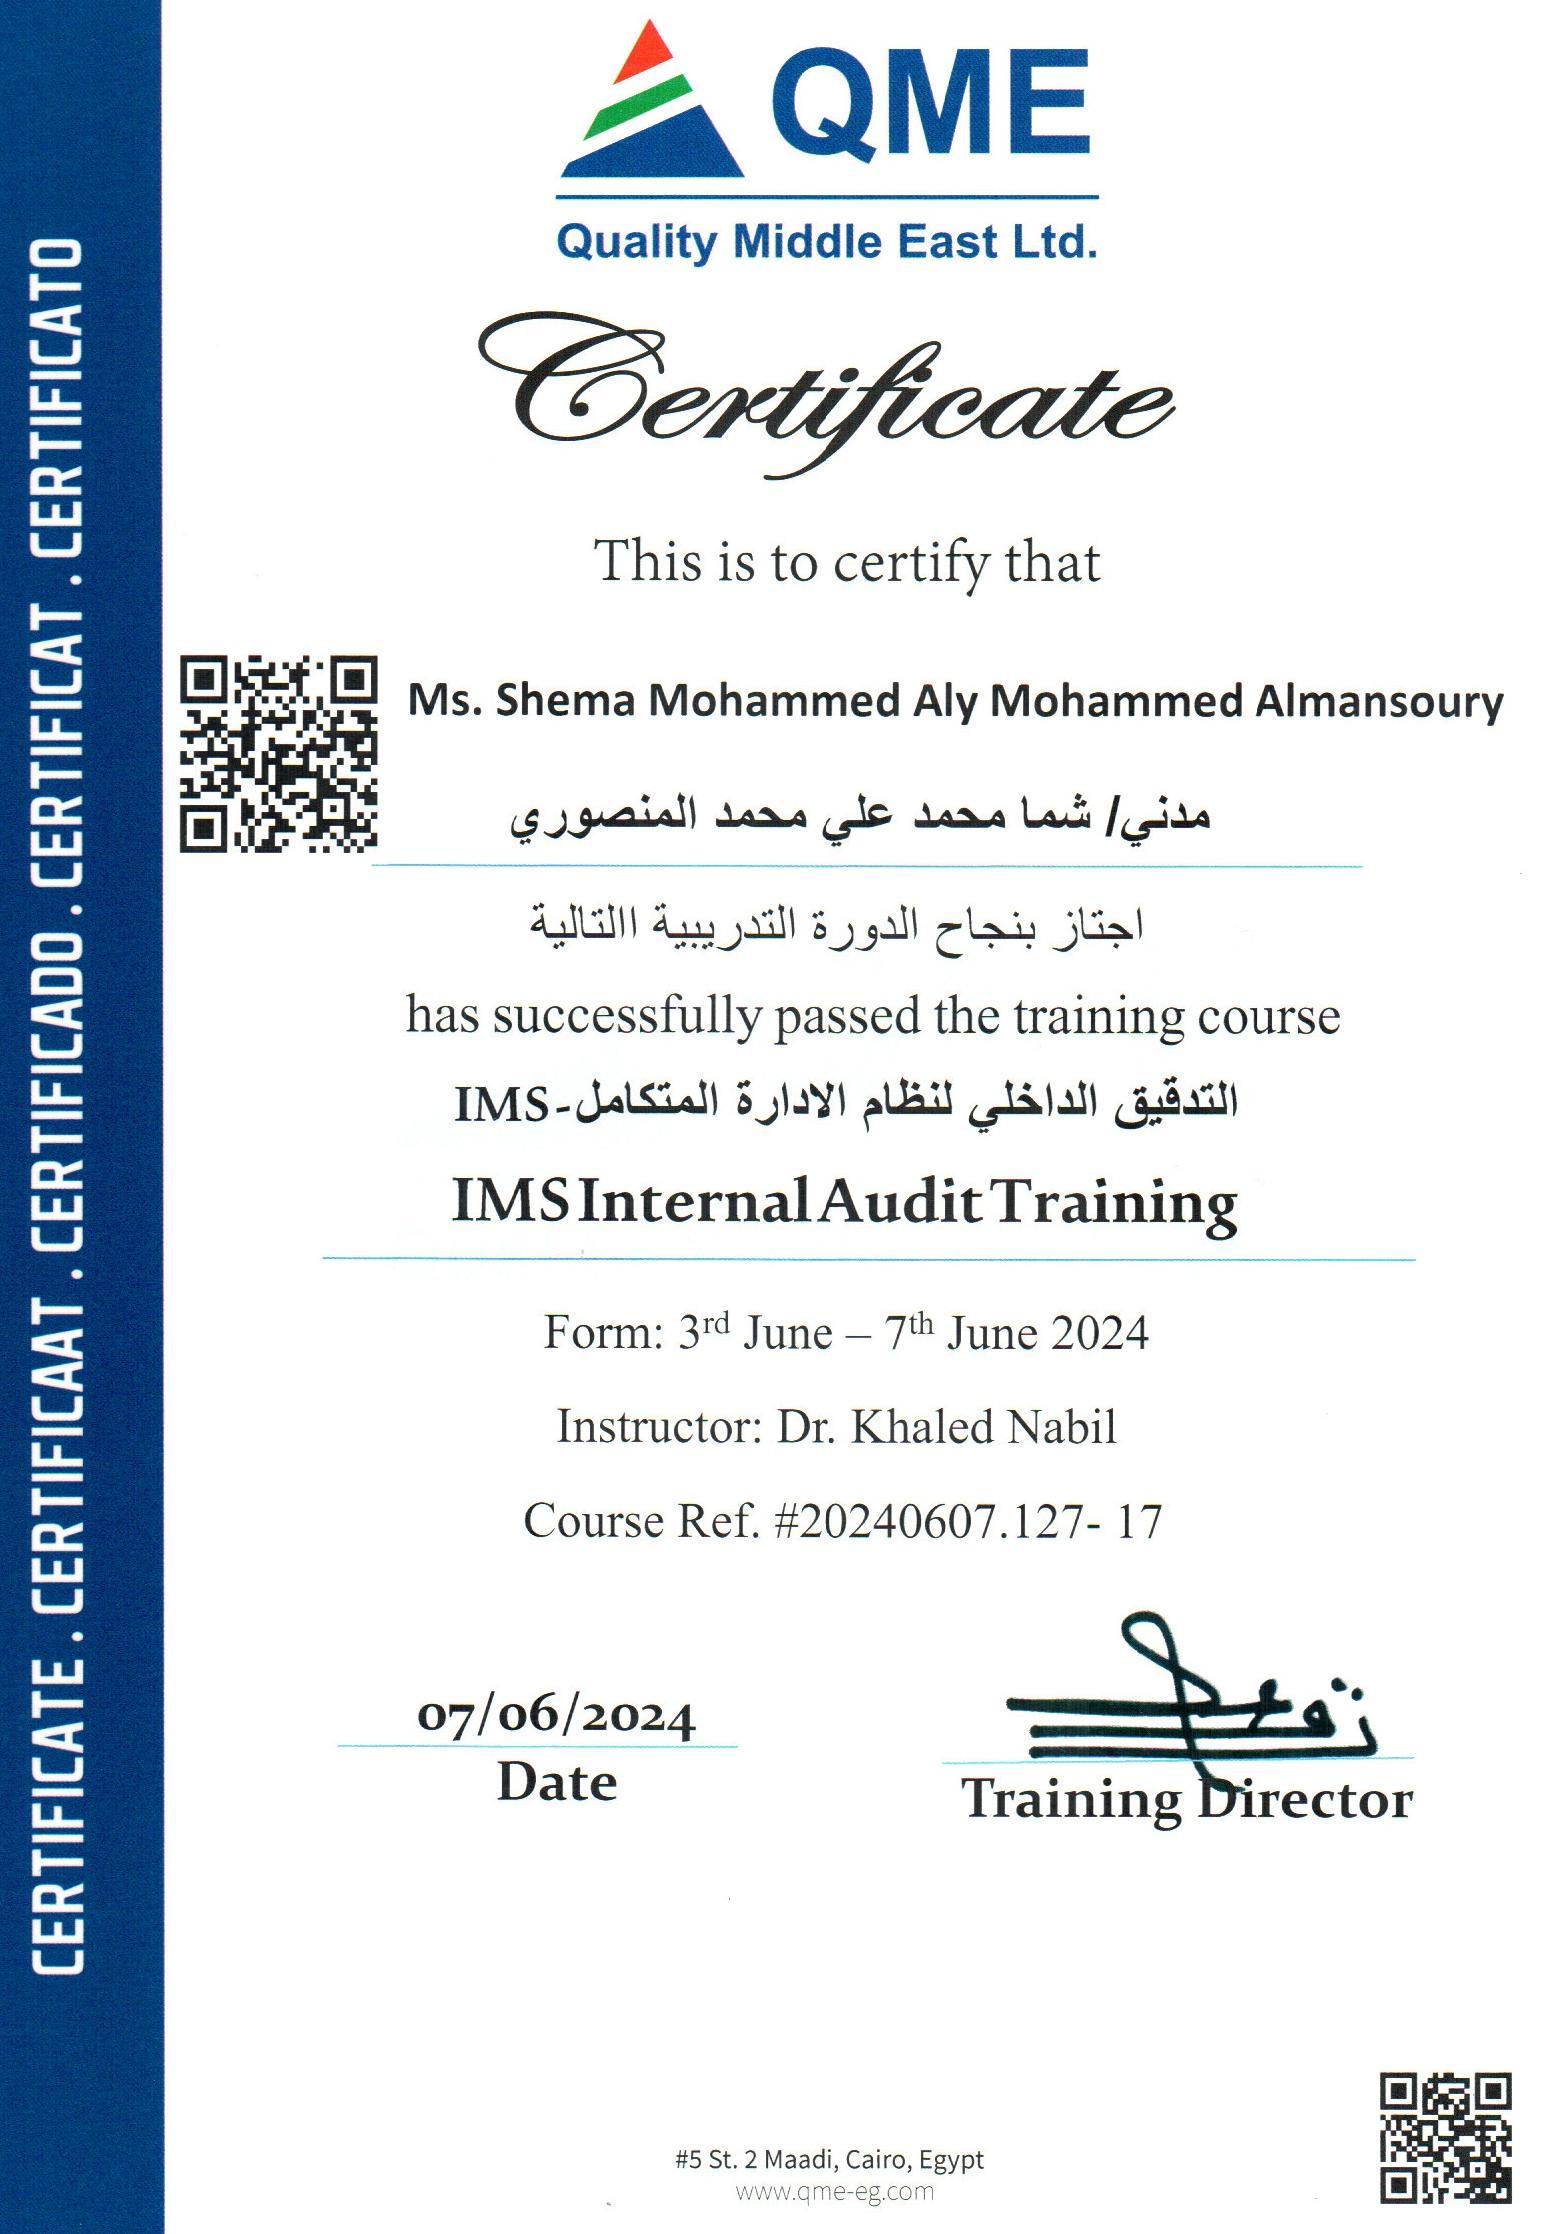 Ms. Shema Mohammed Aly Mohammed Al Mansoury